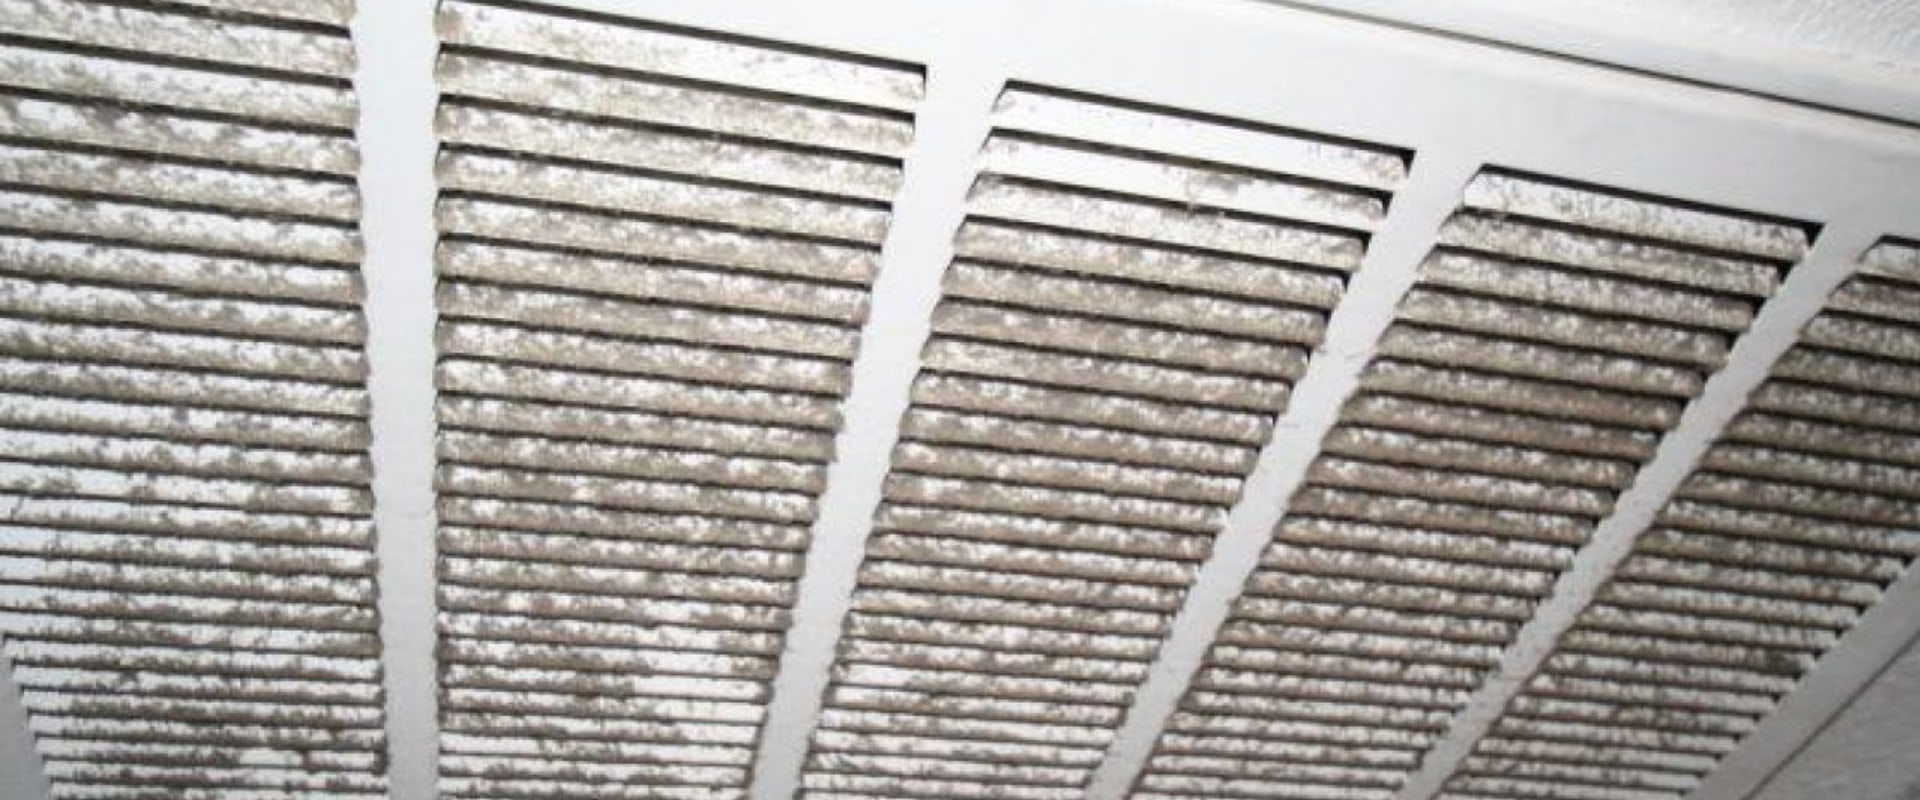 The Health Hazards of Neglected Air Ducts